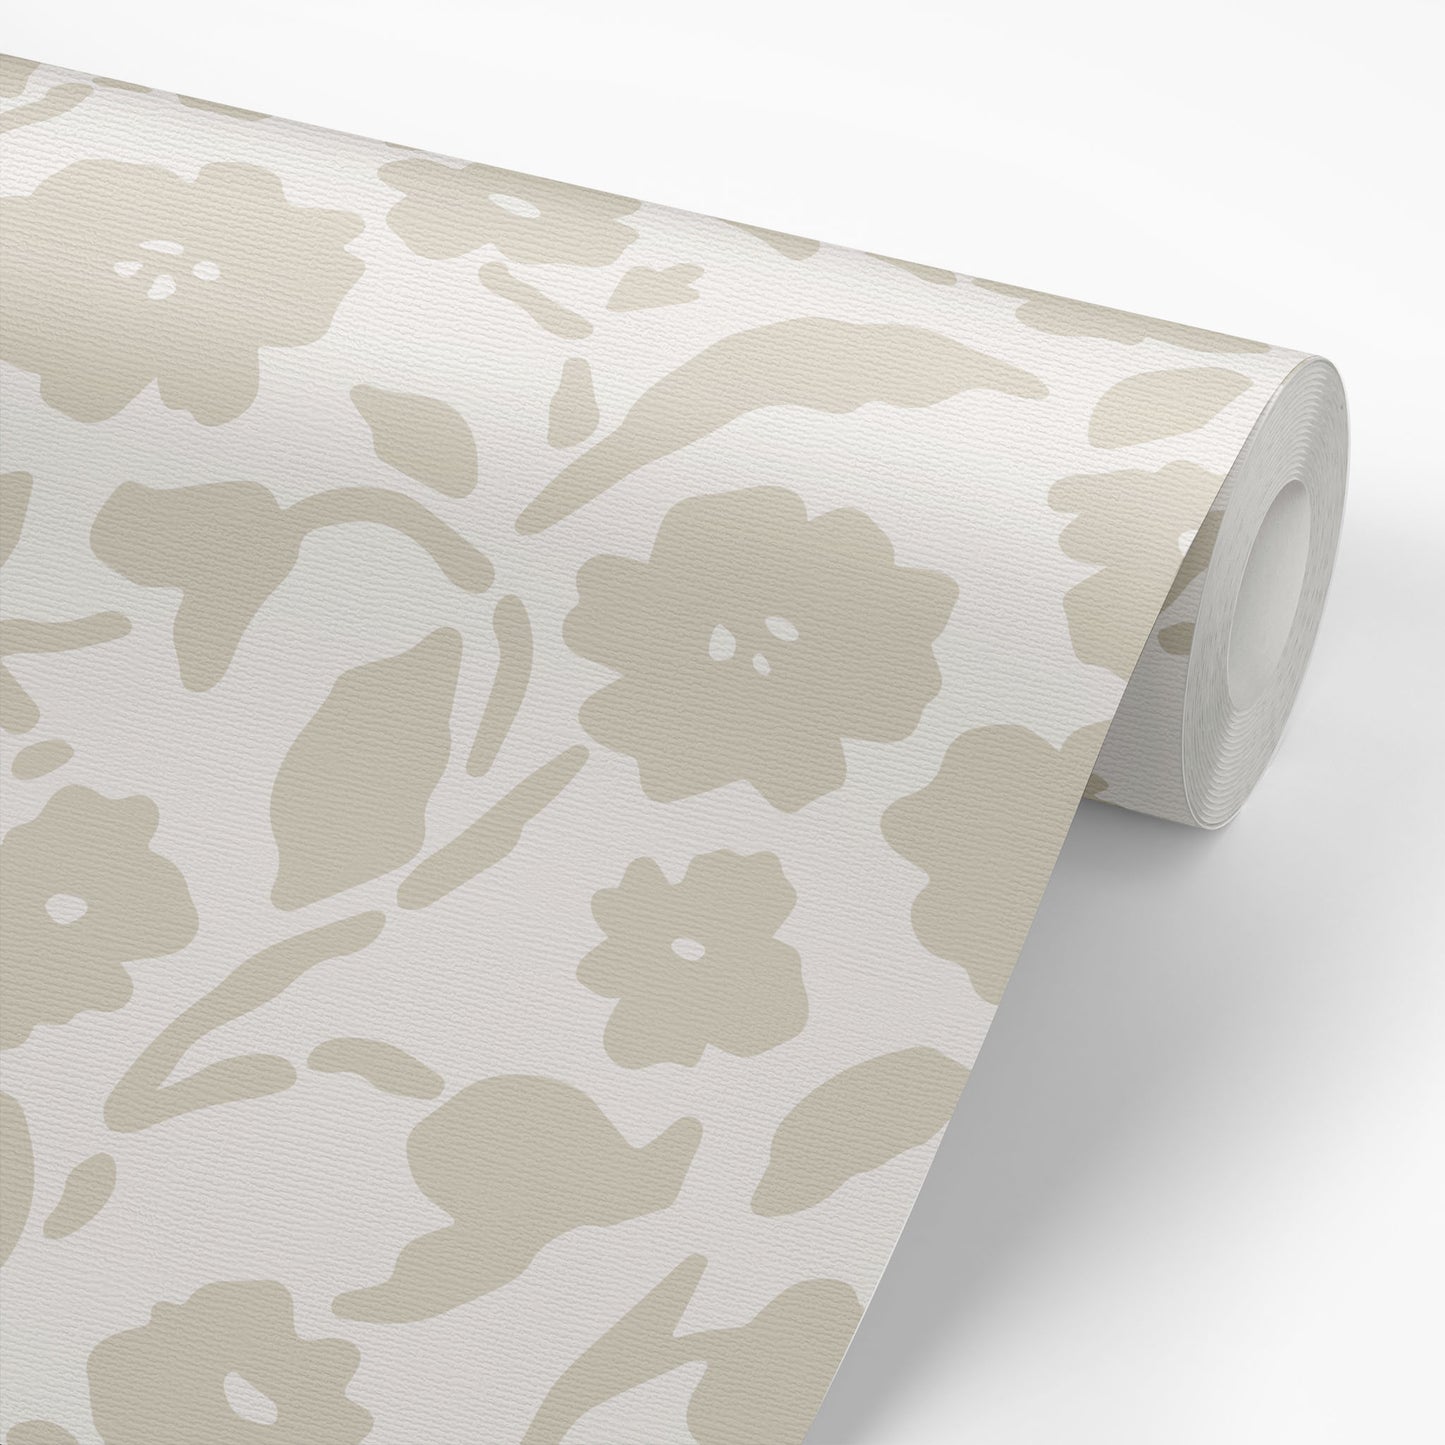 Add a touch of femininity to your space with our Lexington Wallpaper in a taupe hue shown on a wallpaper roll.